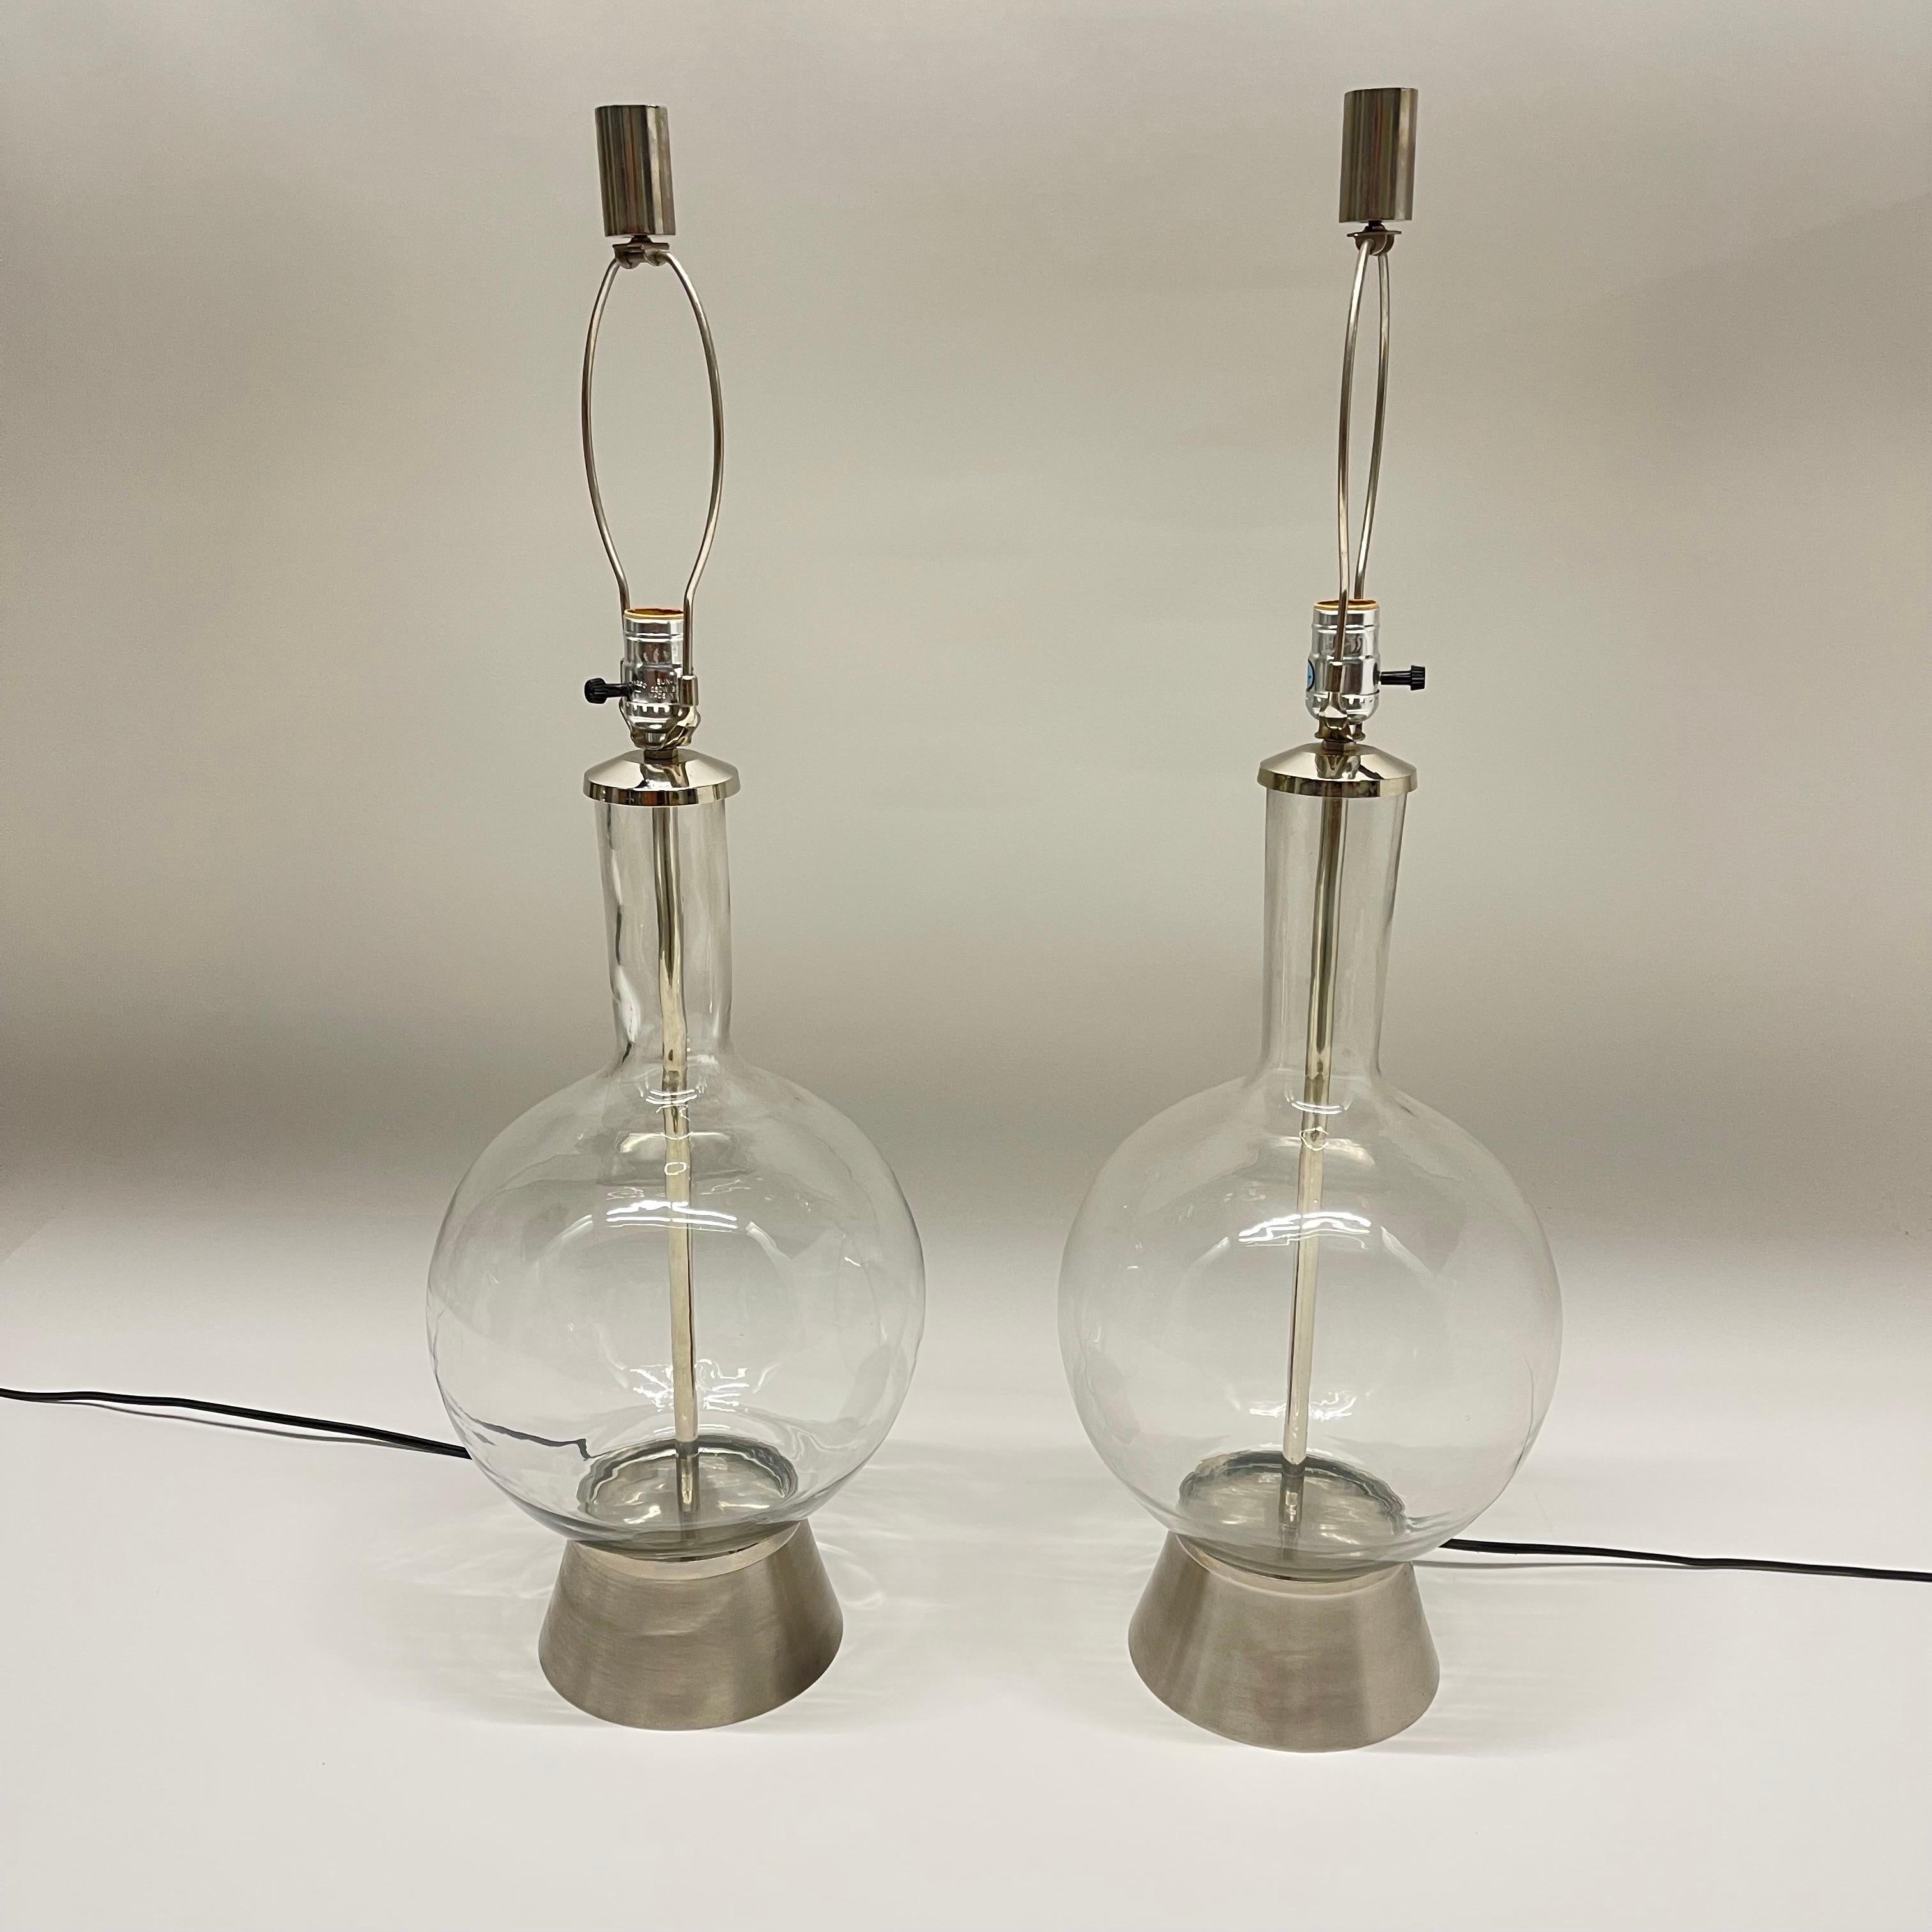 Pair of Mid-Century Mouth Blown Glass and Brushed Nickel Lamp with Paper Shades In Good Condition For Sale In Miami, FL